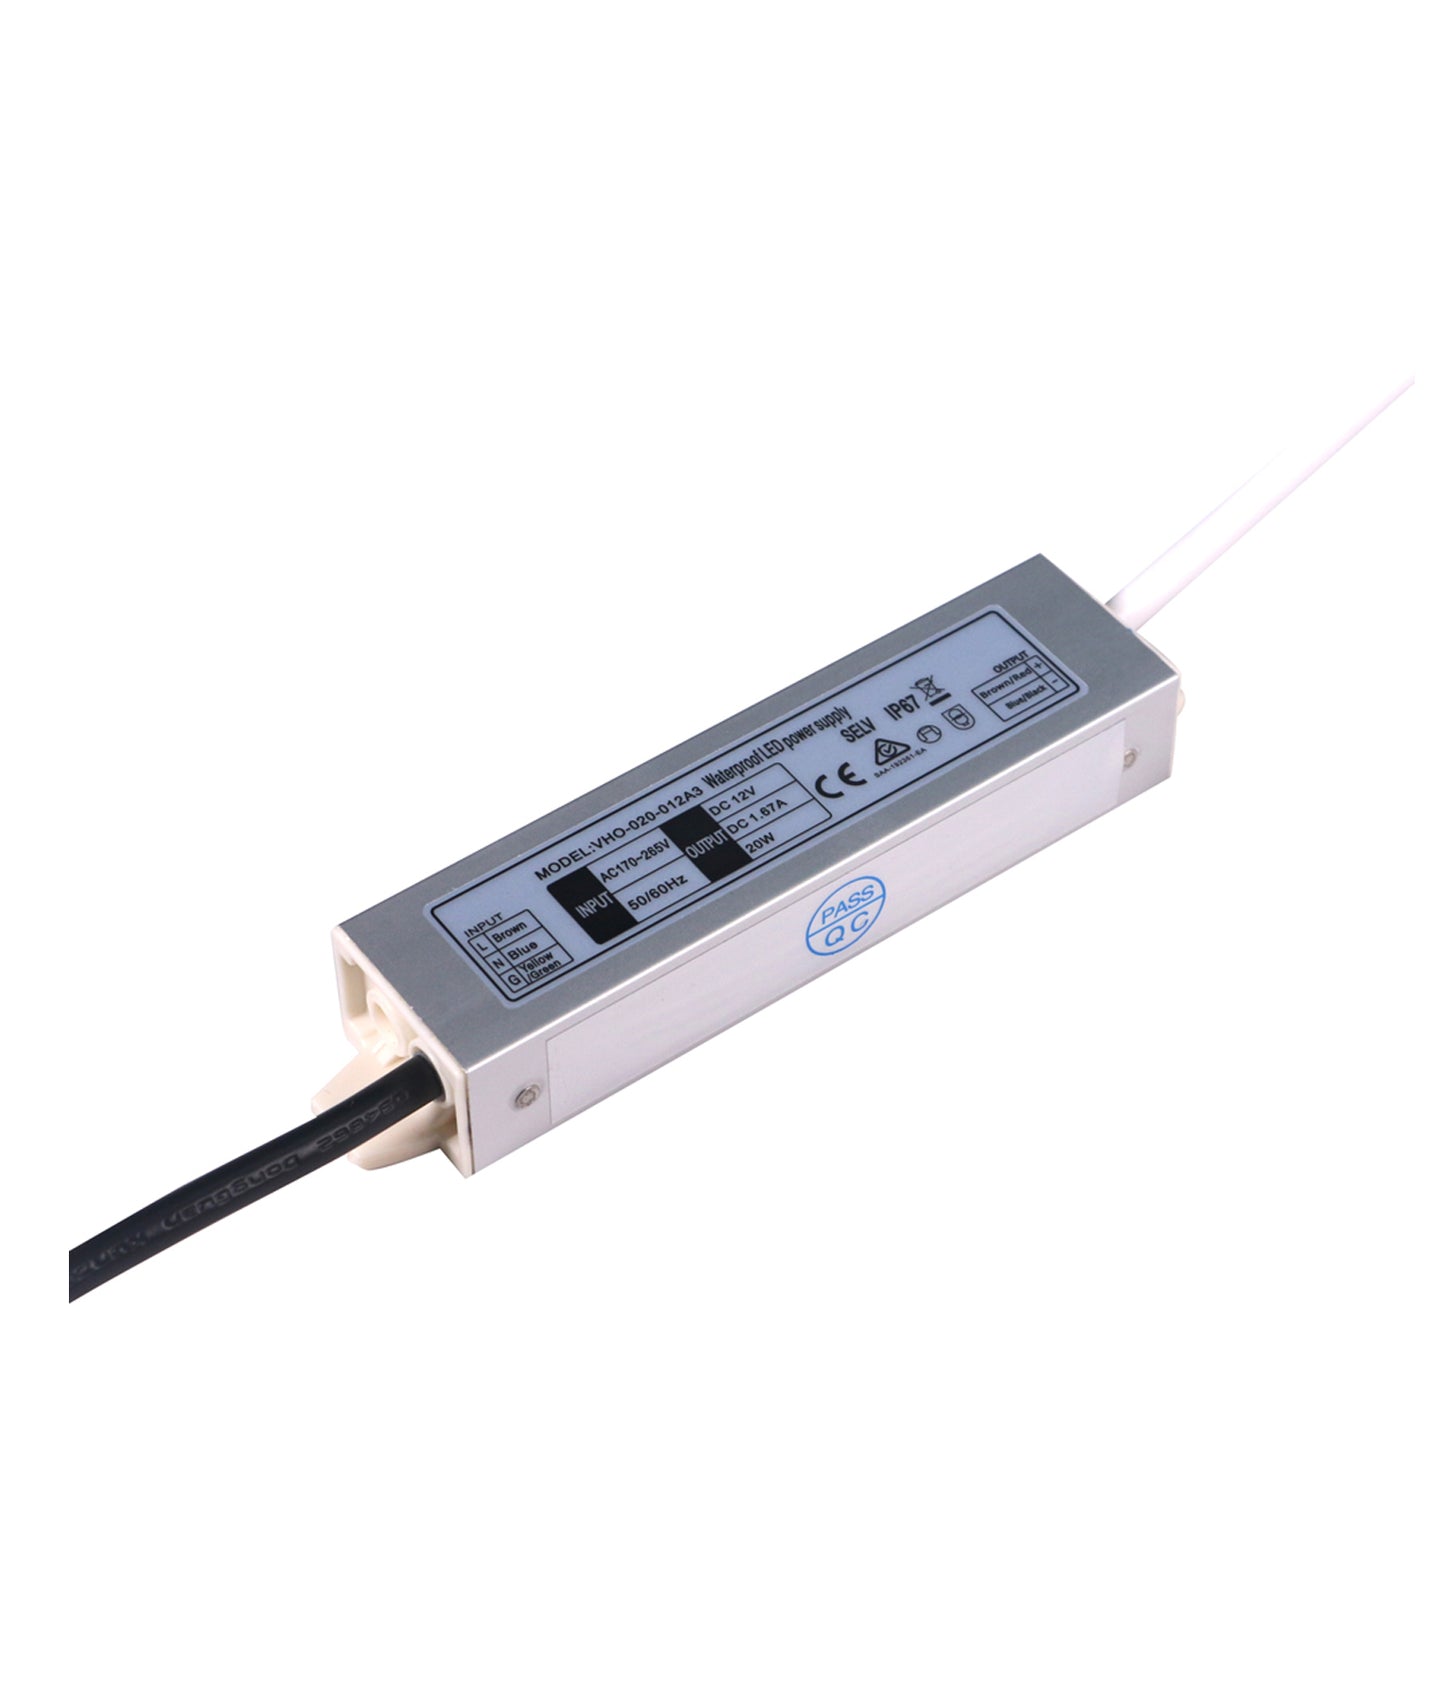 OTTER2: 12V Waterproof Constant Voltage LED Driver IP67 (20W)